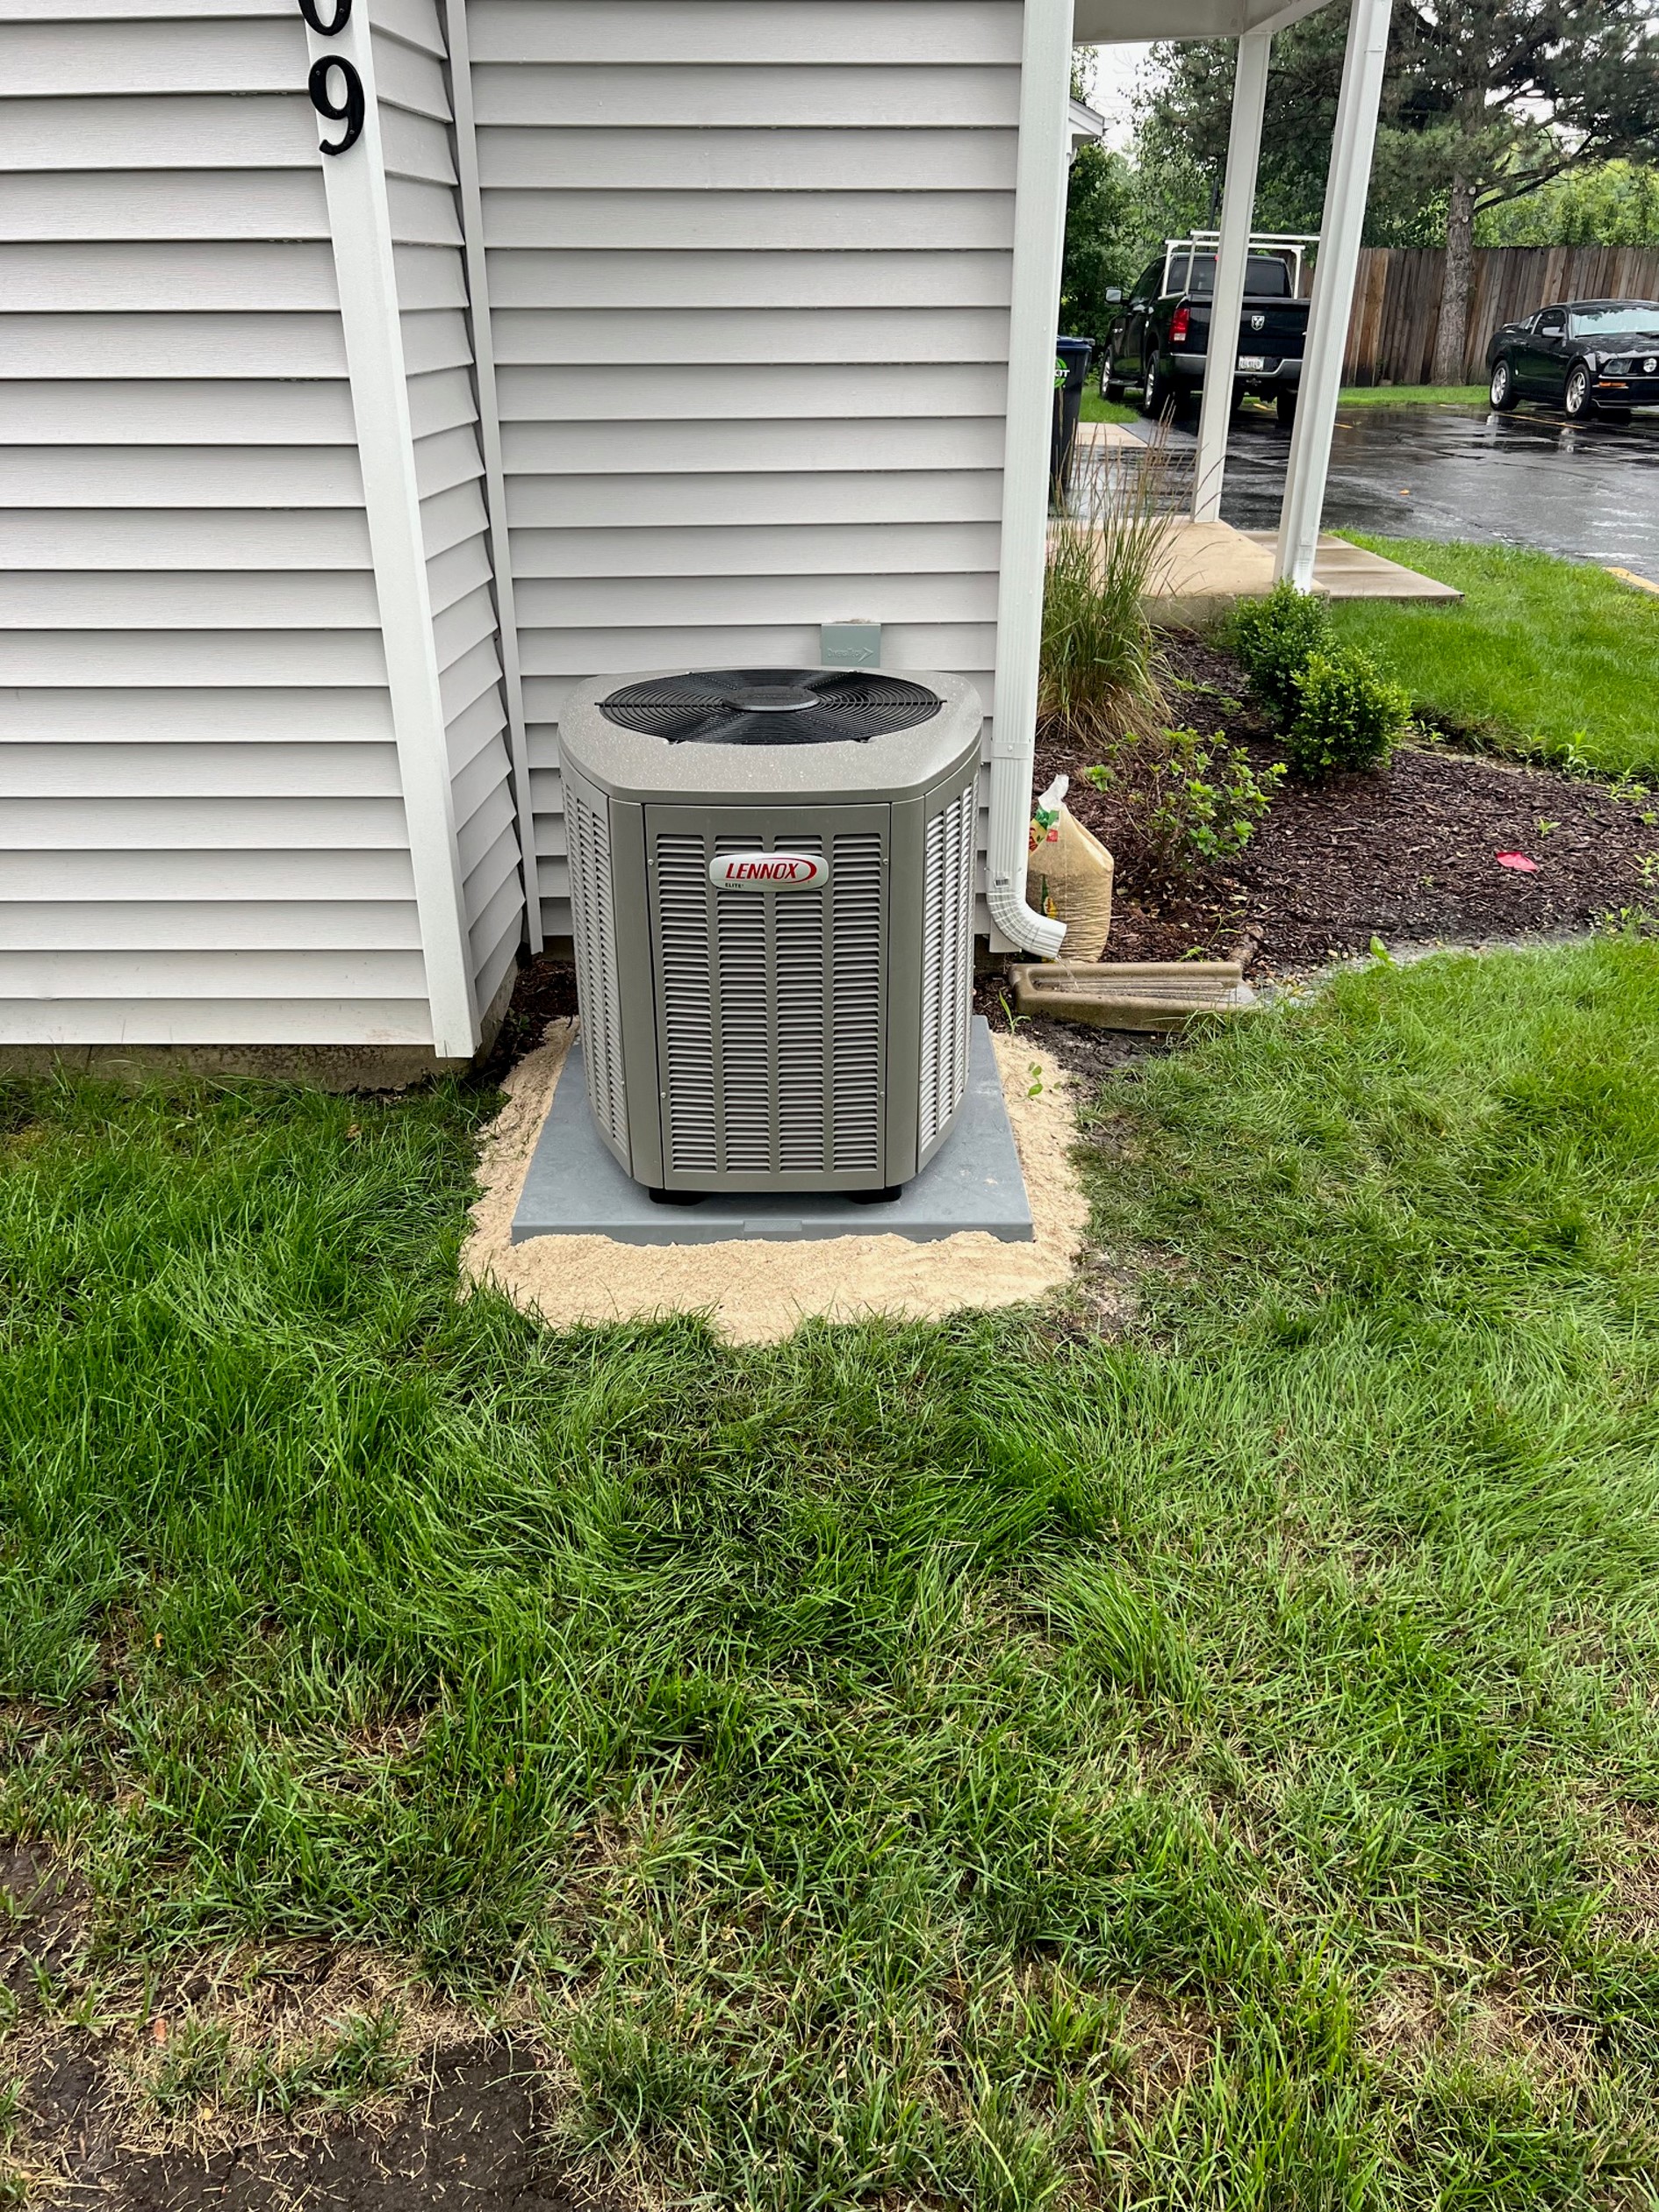 When you're looking for a reliable HVAC company "near me" in Streamwood, IL, Pure Comfort Heating and Air Conditioning is your local choice. We're just a call away for prompt and professional service.